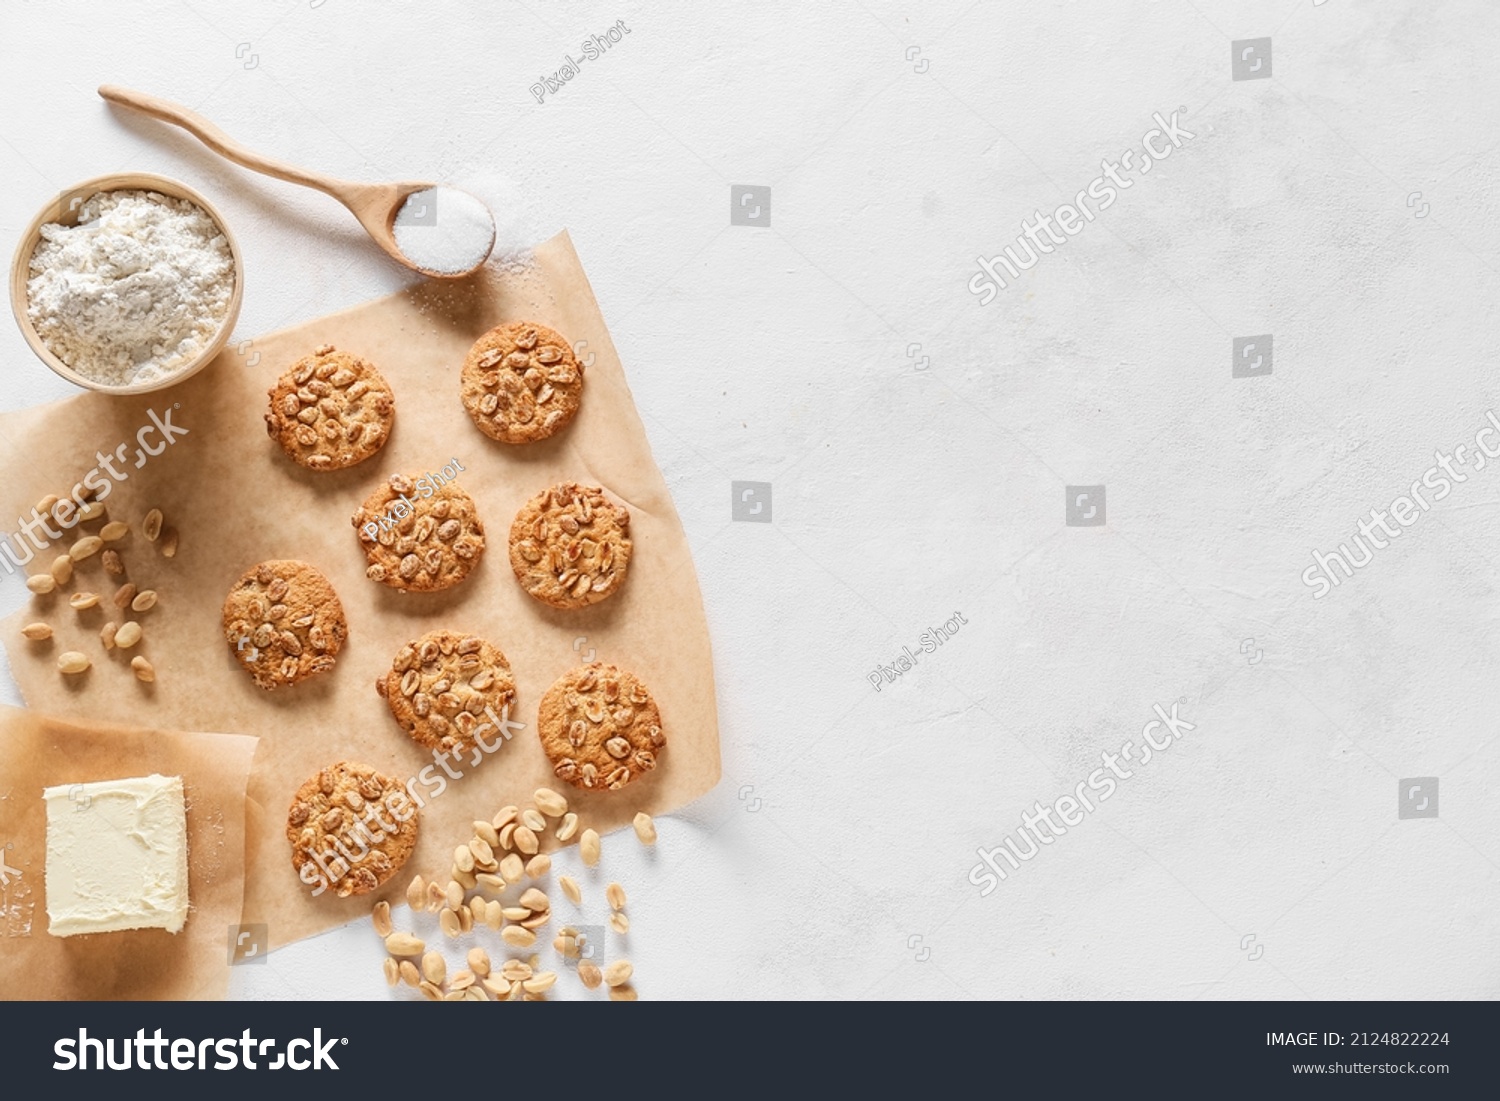 Parchment paper with tasty peanut cookies and ingredients on white background #2124822224